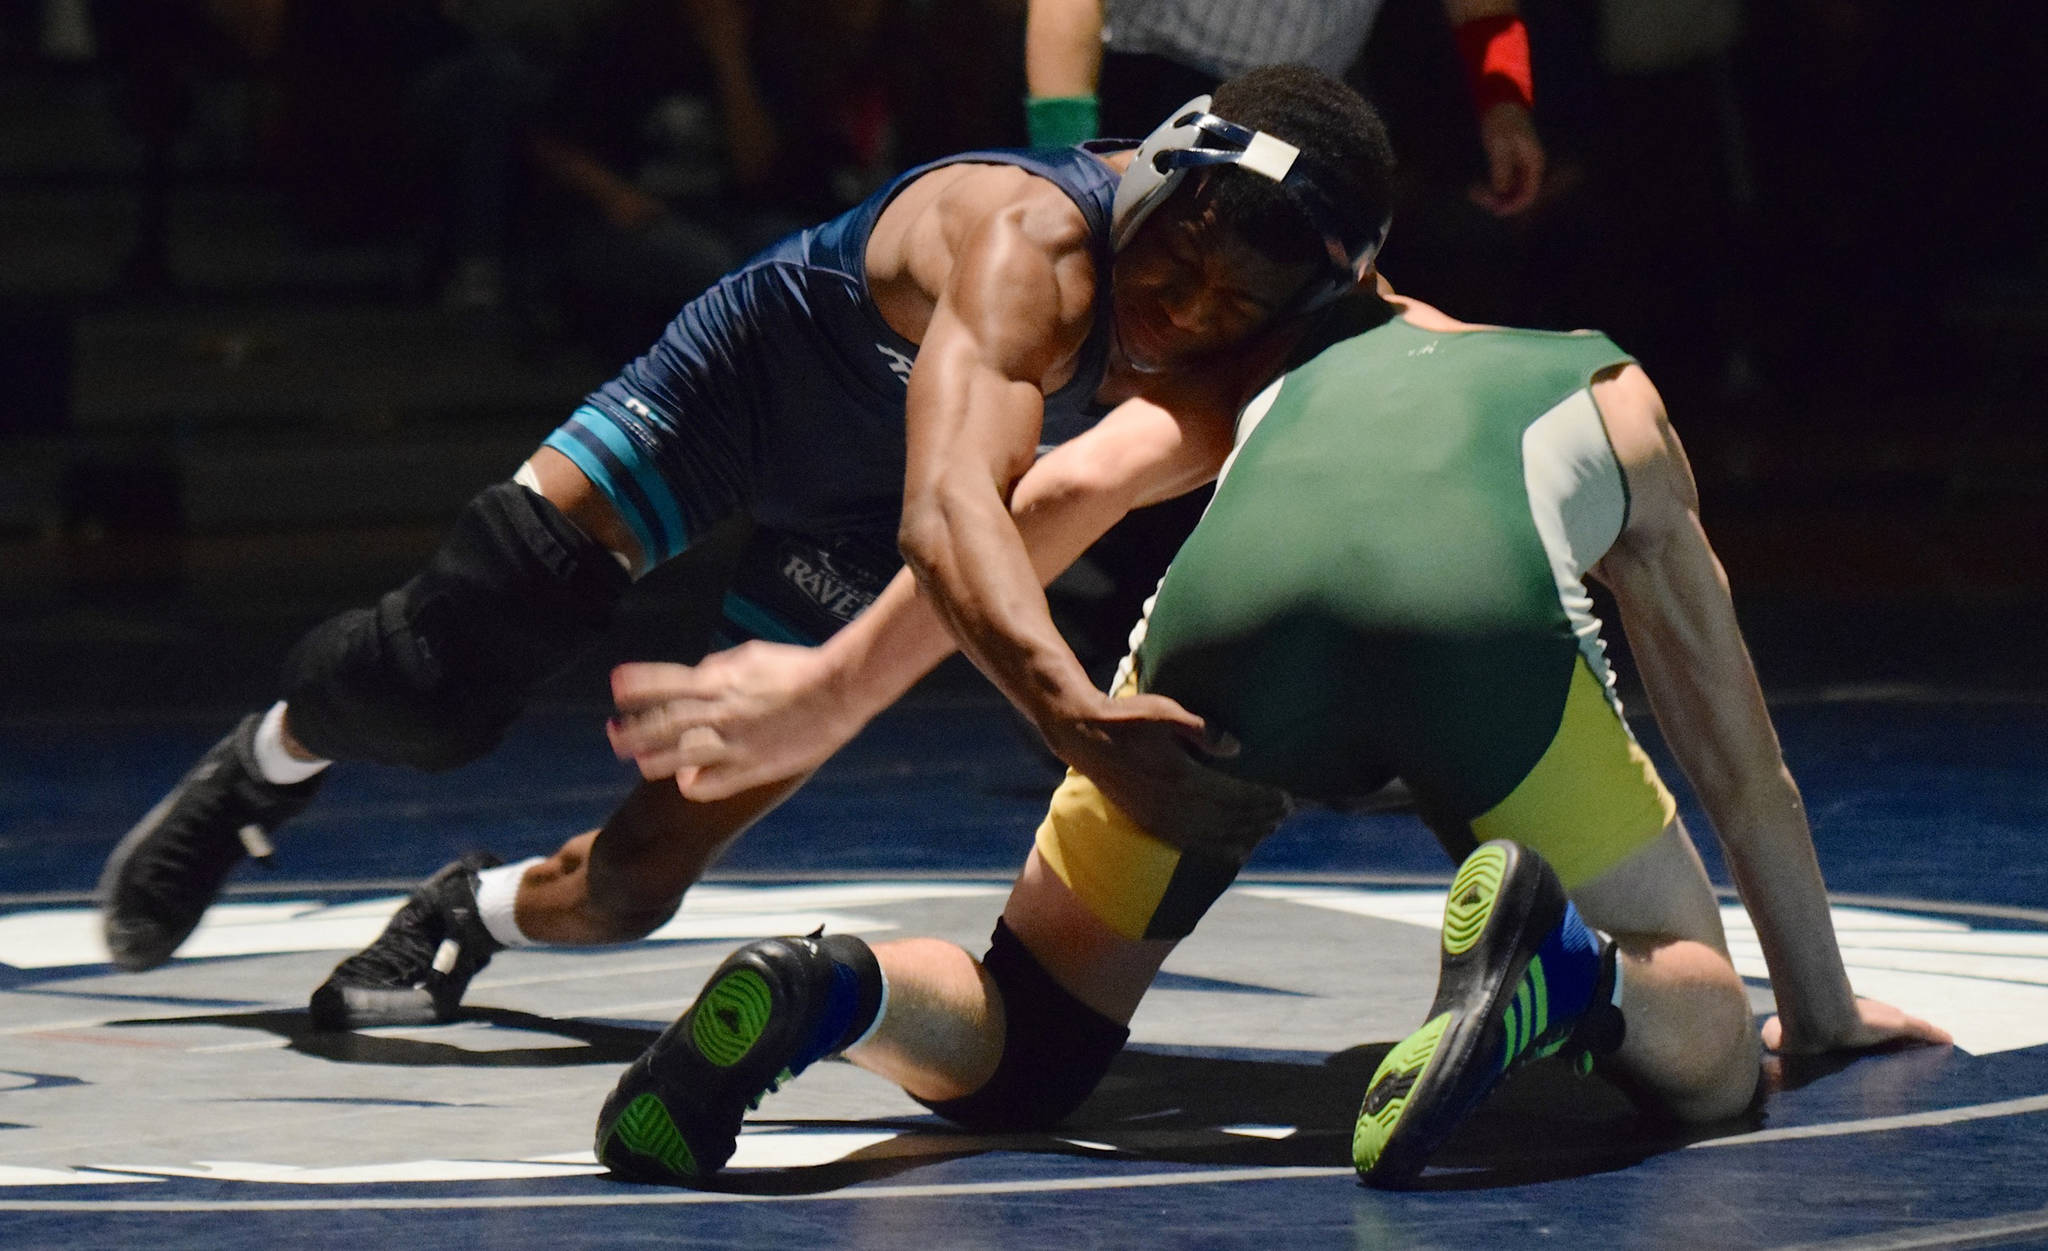 Auburn Riverside’s state-class Yusef Nelson maneuvers around Auburn’s Quinton Weddle during their 120-pound bout Wednesday night. Nelson won by first-round fall. RACHEL CIAMPI, Auburn Reporter